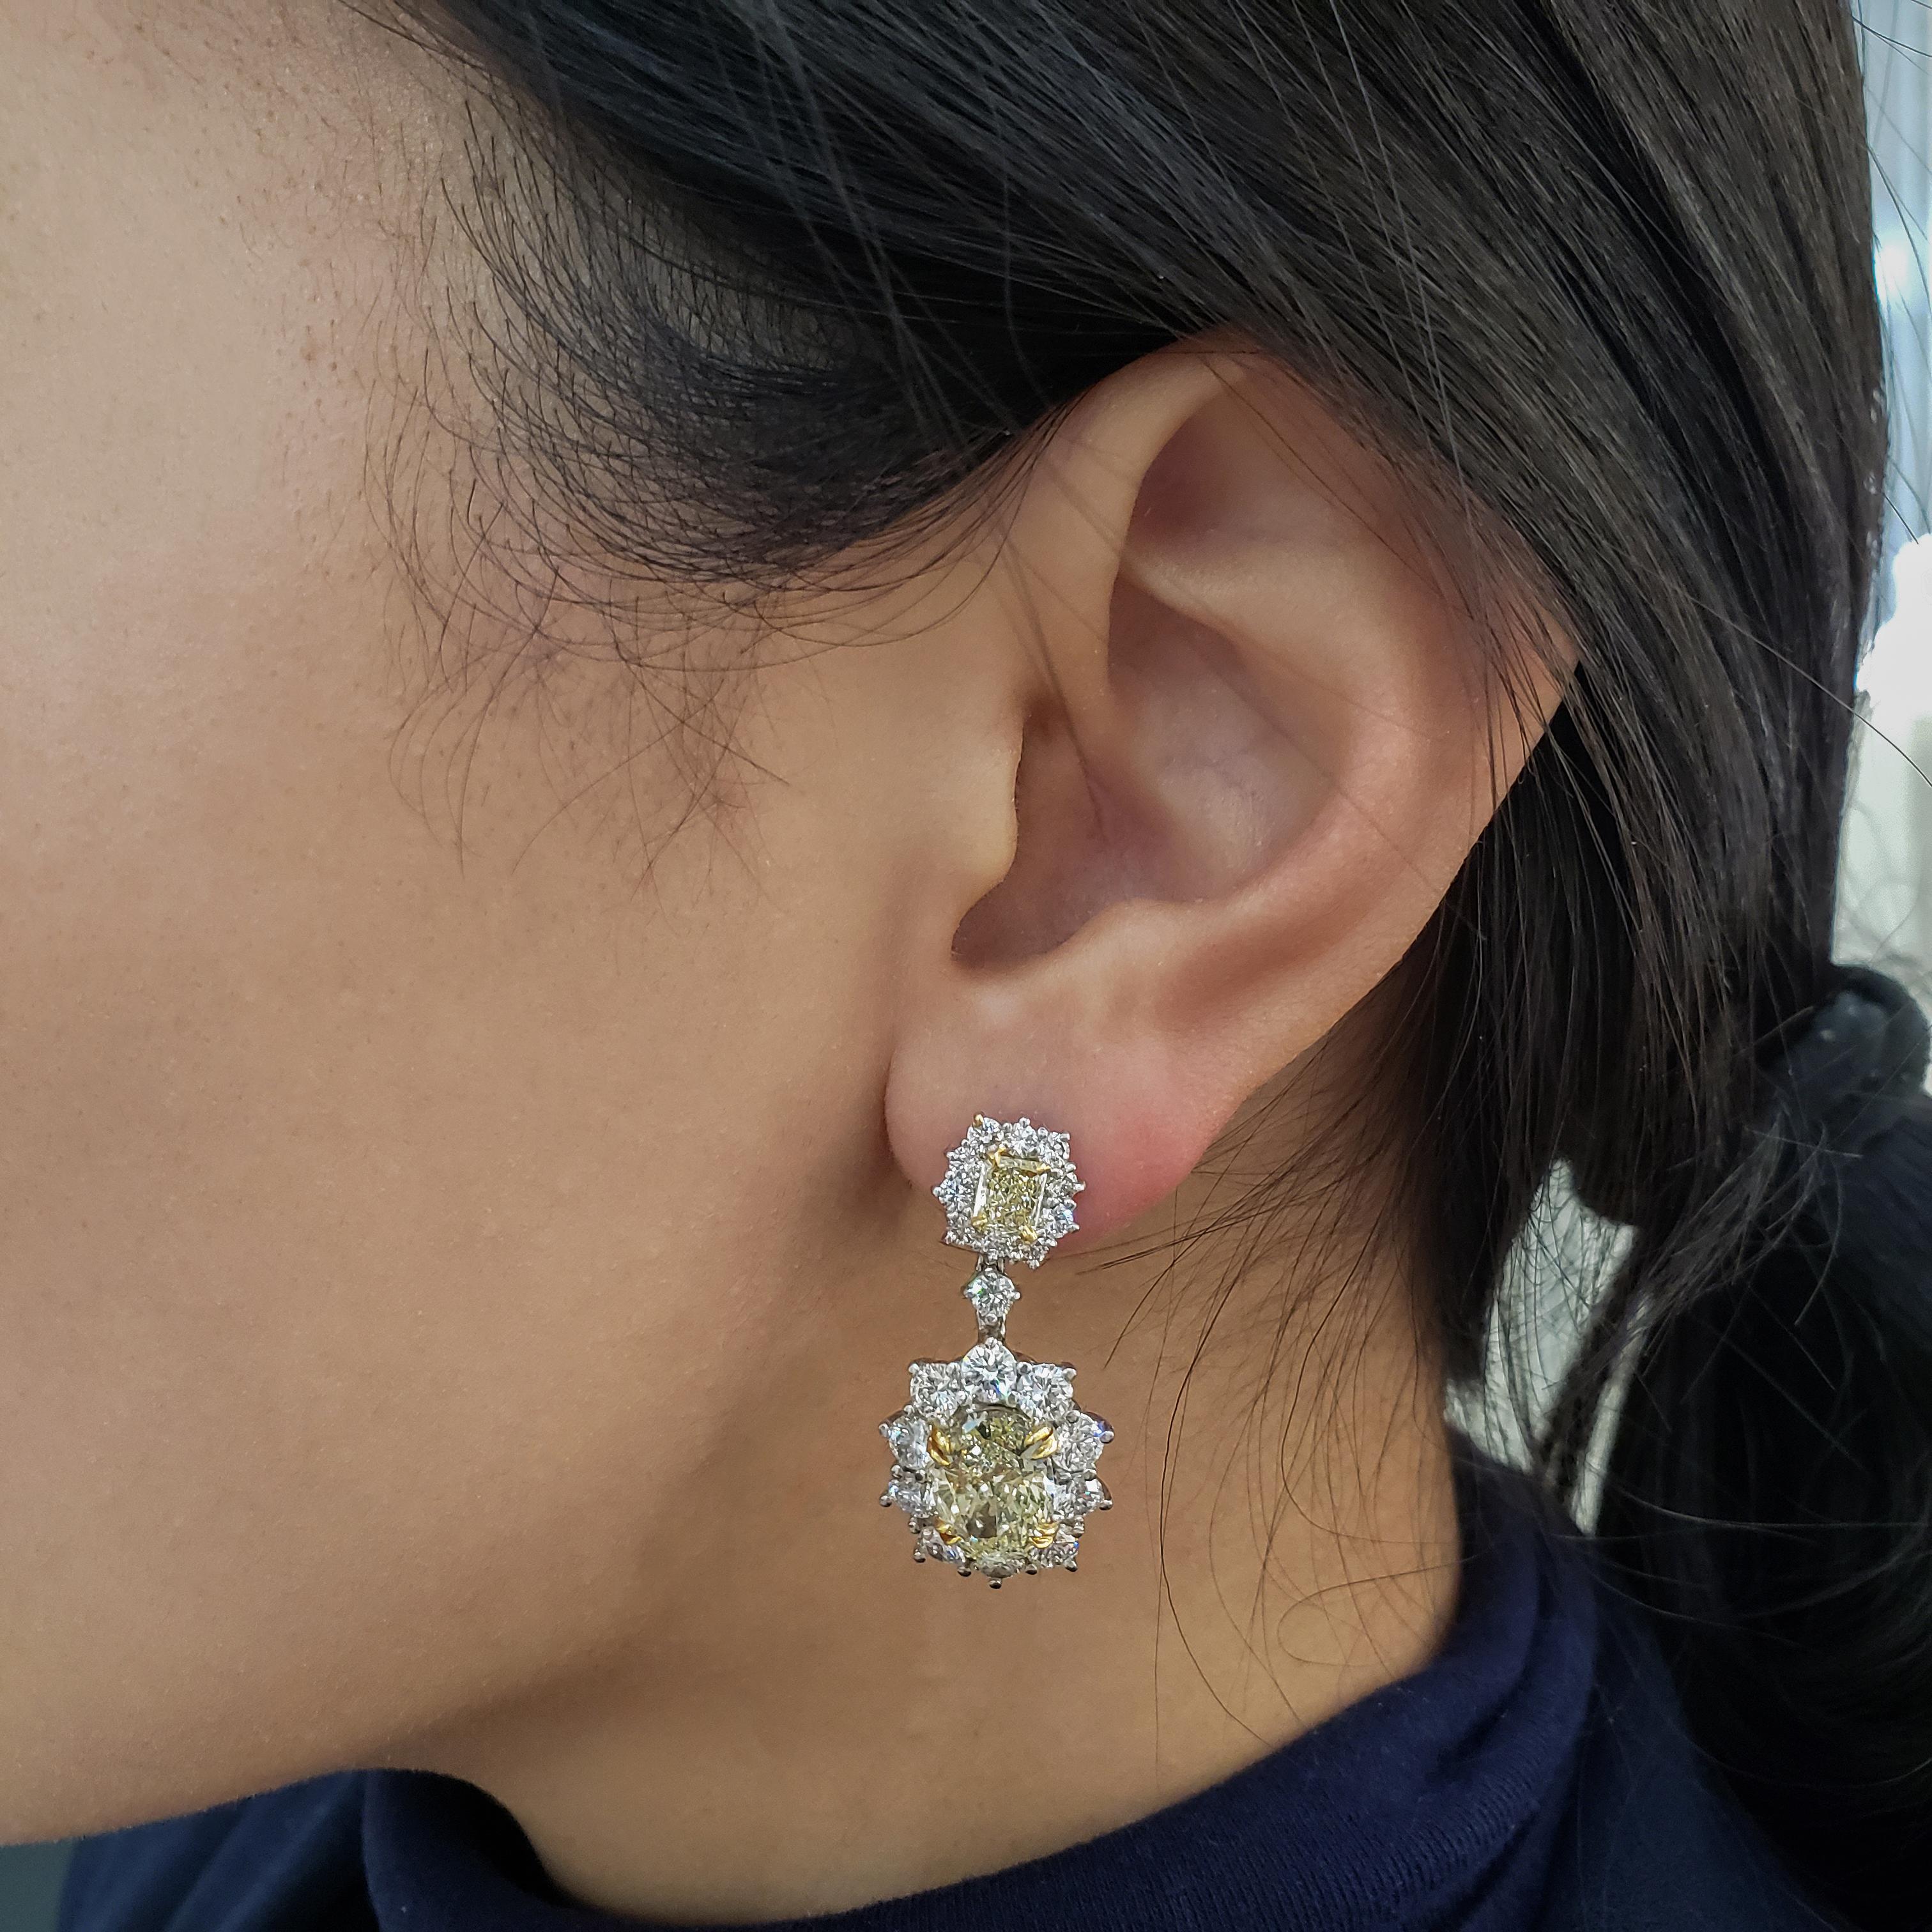 Burst out in style with this gorgeous pair of 18k white gold earrings. Showcases 2 fancy yellow oval cut diamonds weighing 6.15 carats surrounded by sparkling round diamonds in a  creative floral motif design. Suspended on vibrant radiant cut yellow